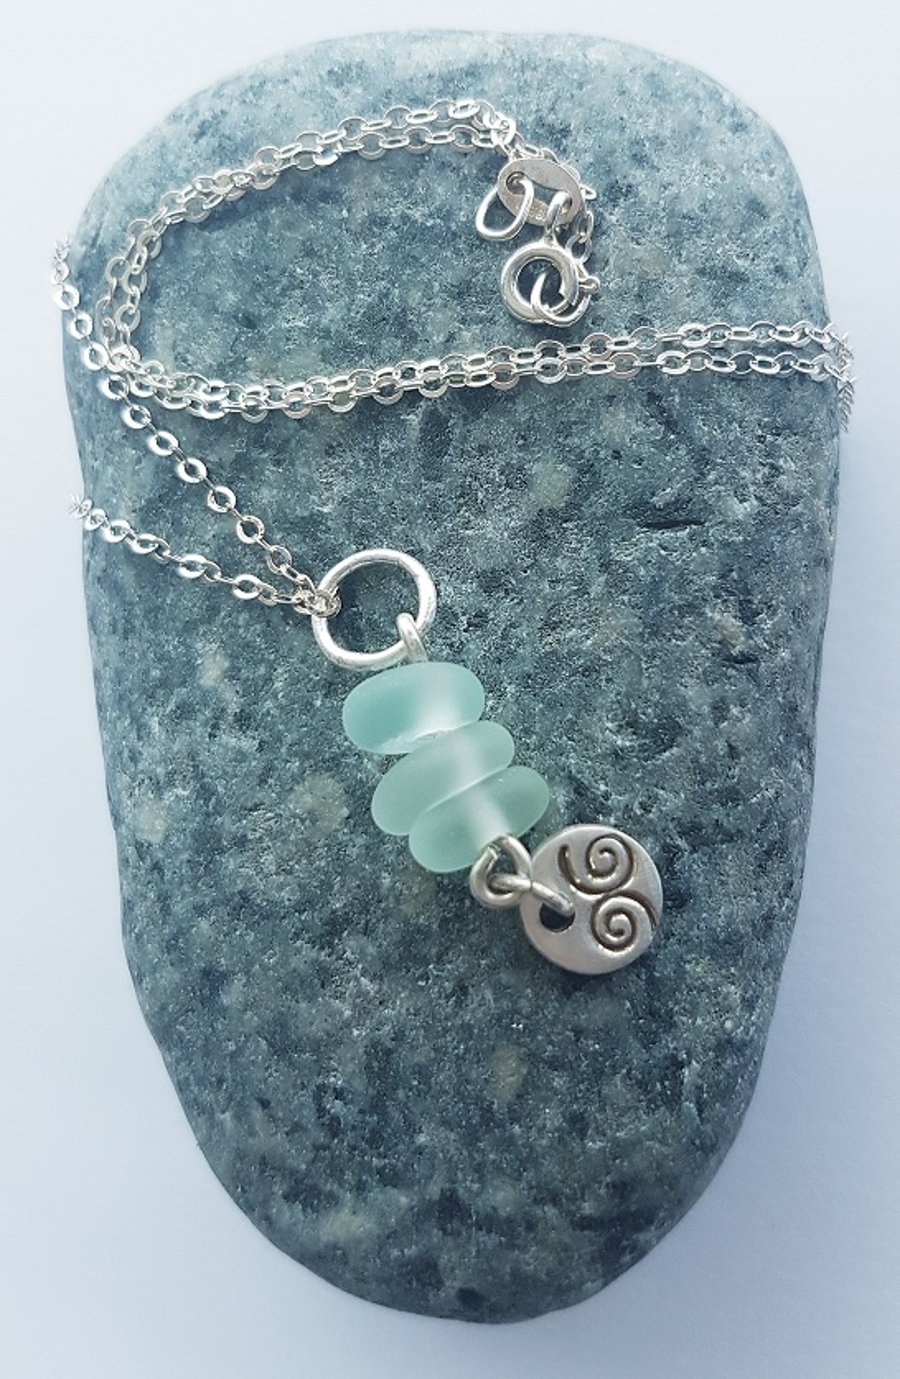 Seaglass Pendant on 18" Sterling Silver trace chain.